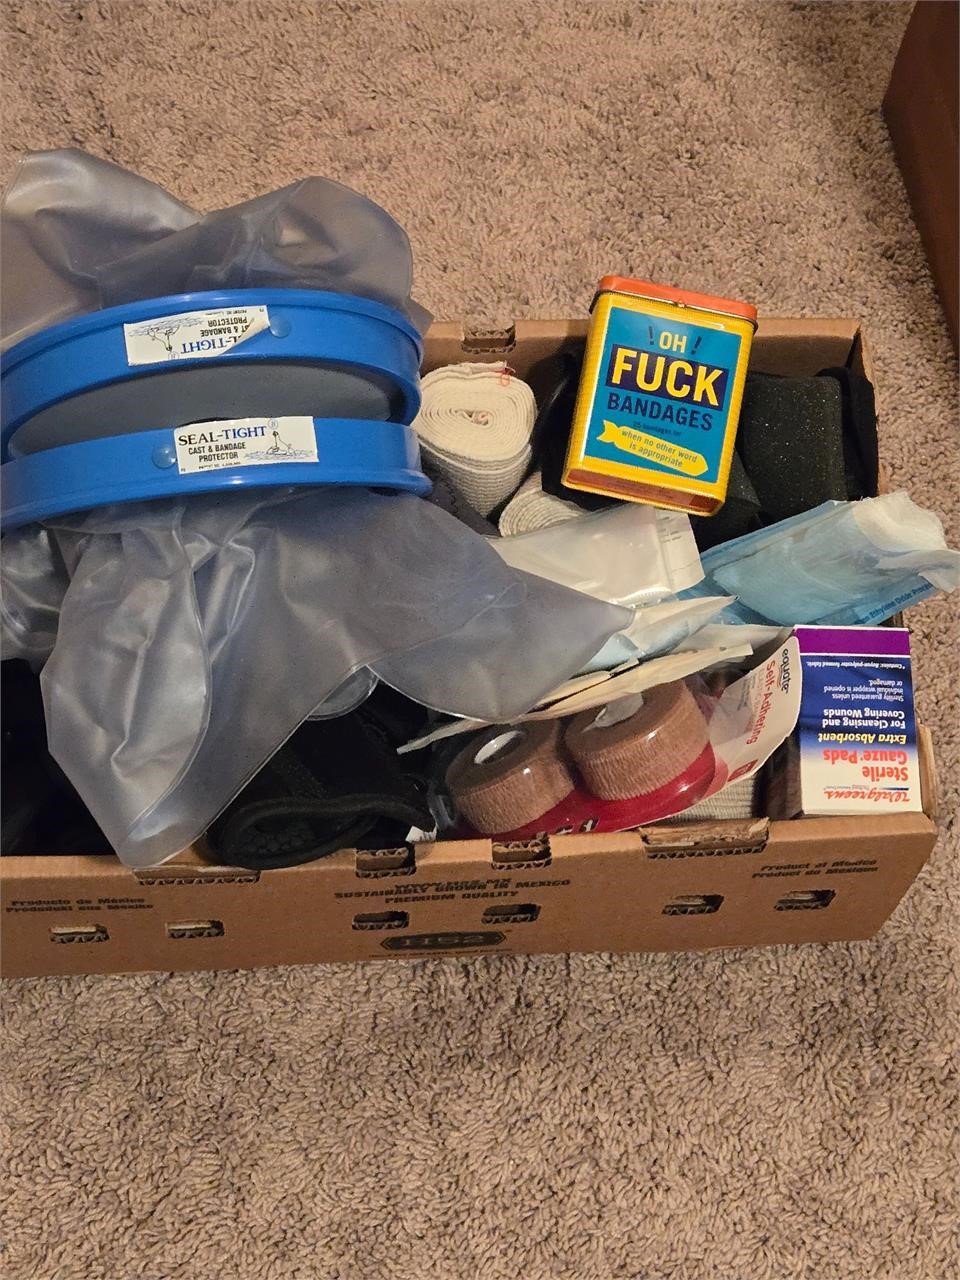 First aid items